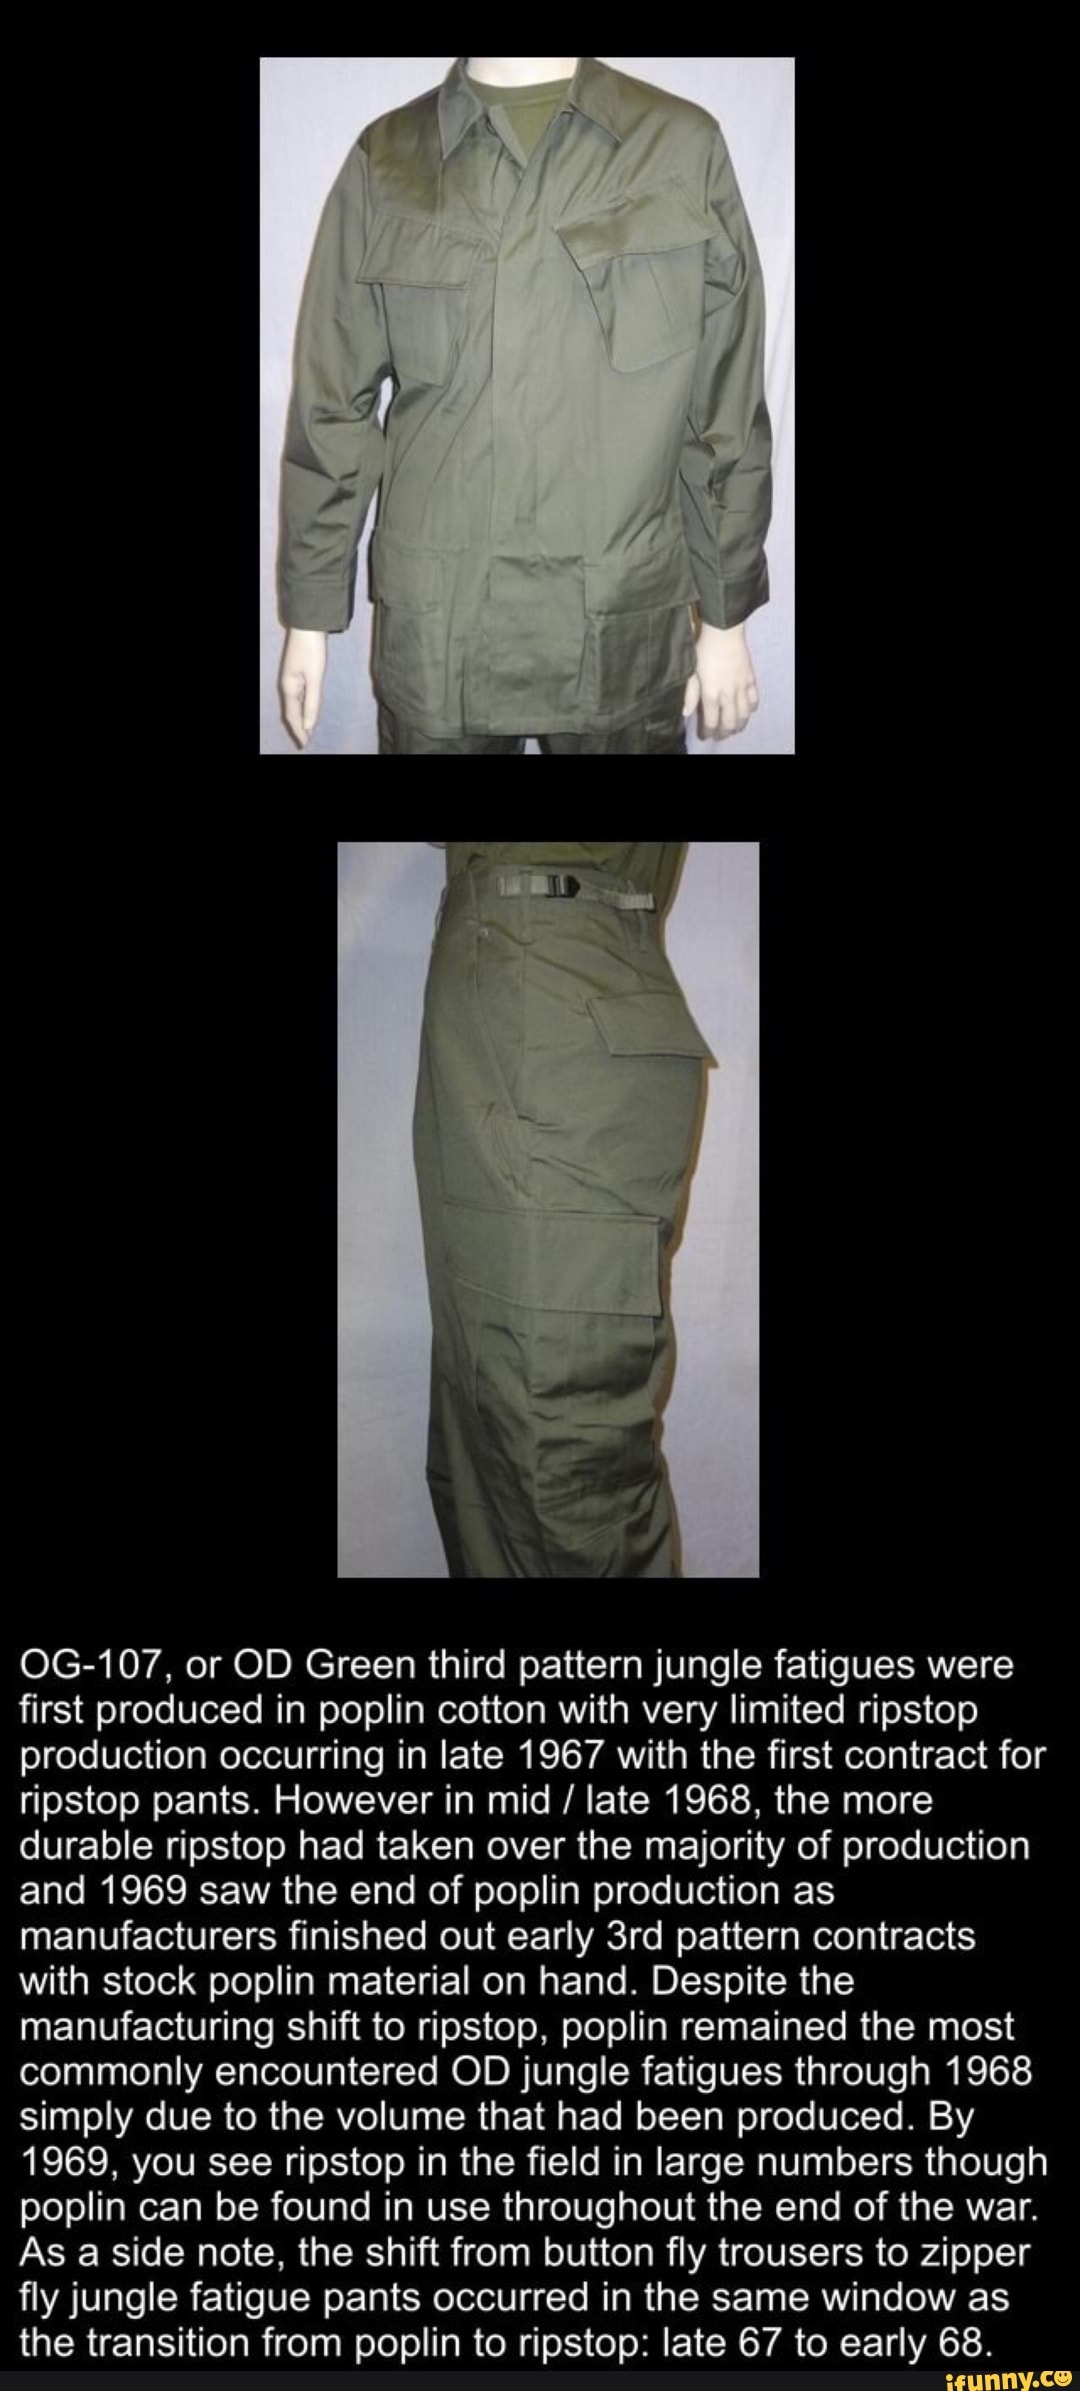 OG-107, or OD Green third pattern jungle fatigues were first produced ...